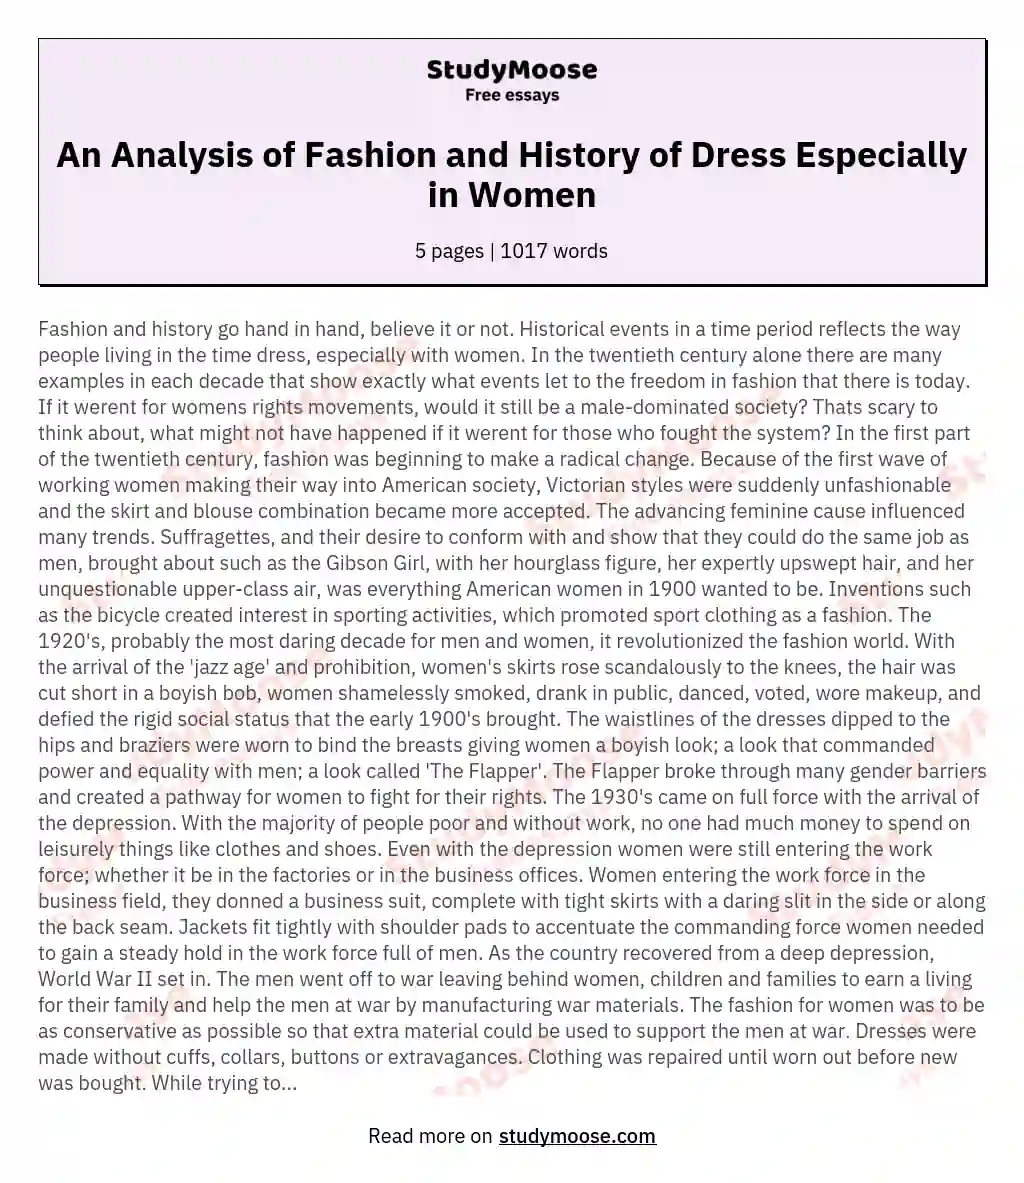 thesis history of fashion